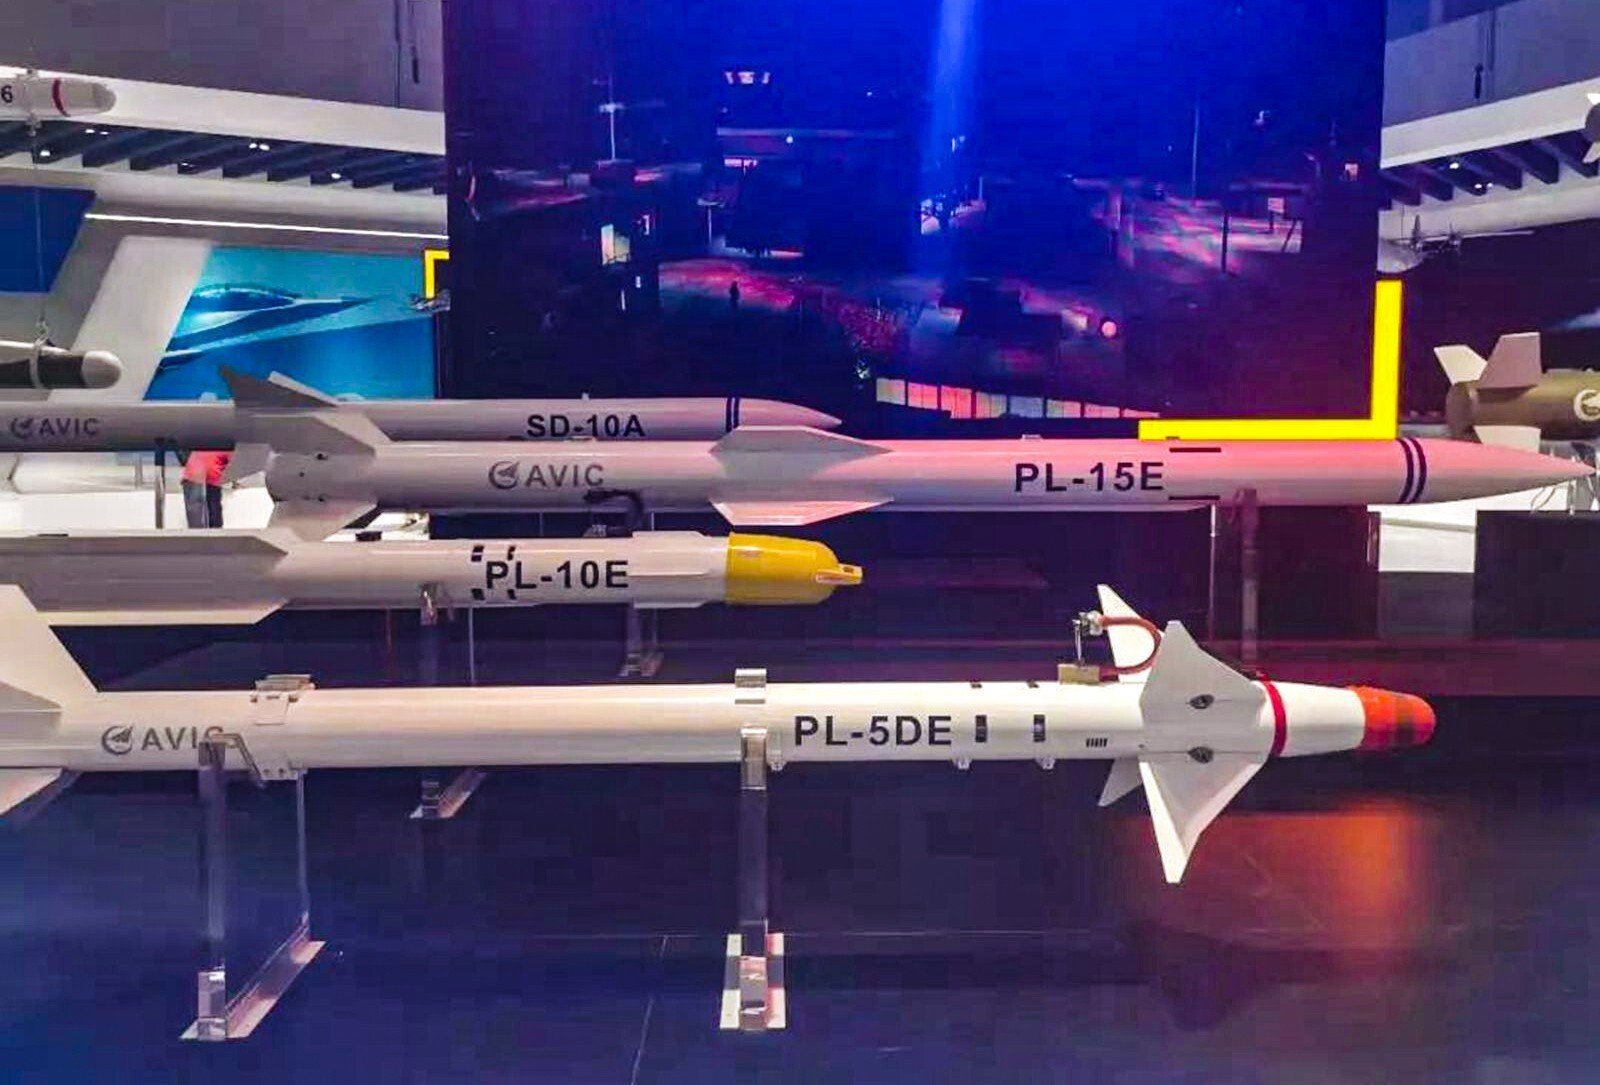 The new missiles on display at the Zhuhai air show. Photo: Handout